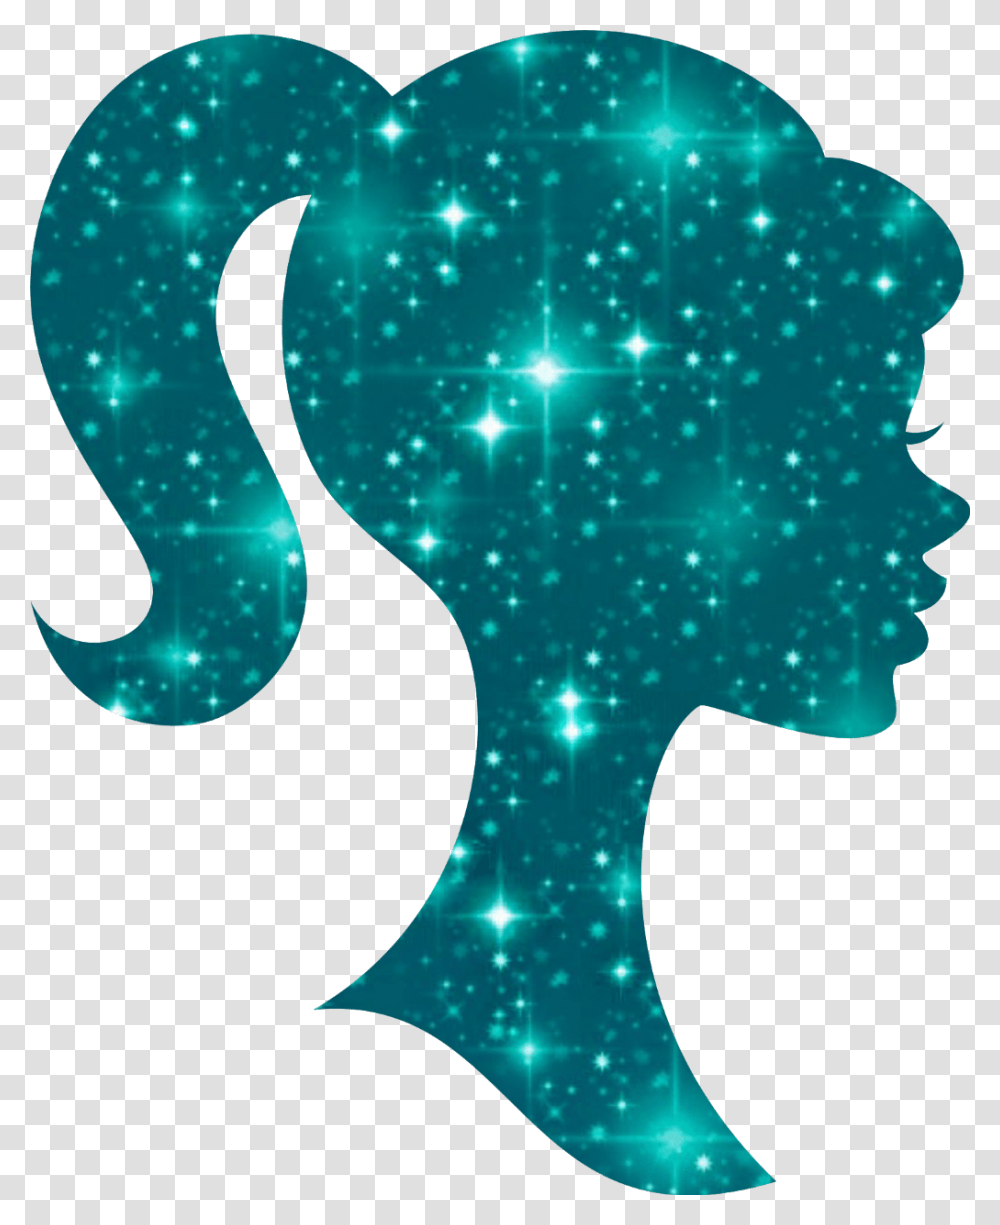 Barbie Glitter Sparkles Girly Illustration, Astronomy, Outer Space, Outdoors, Nature Transparent Png